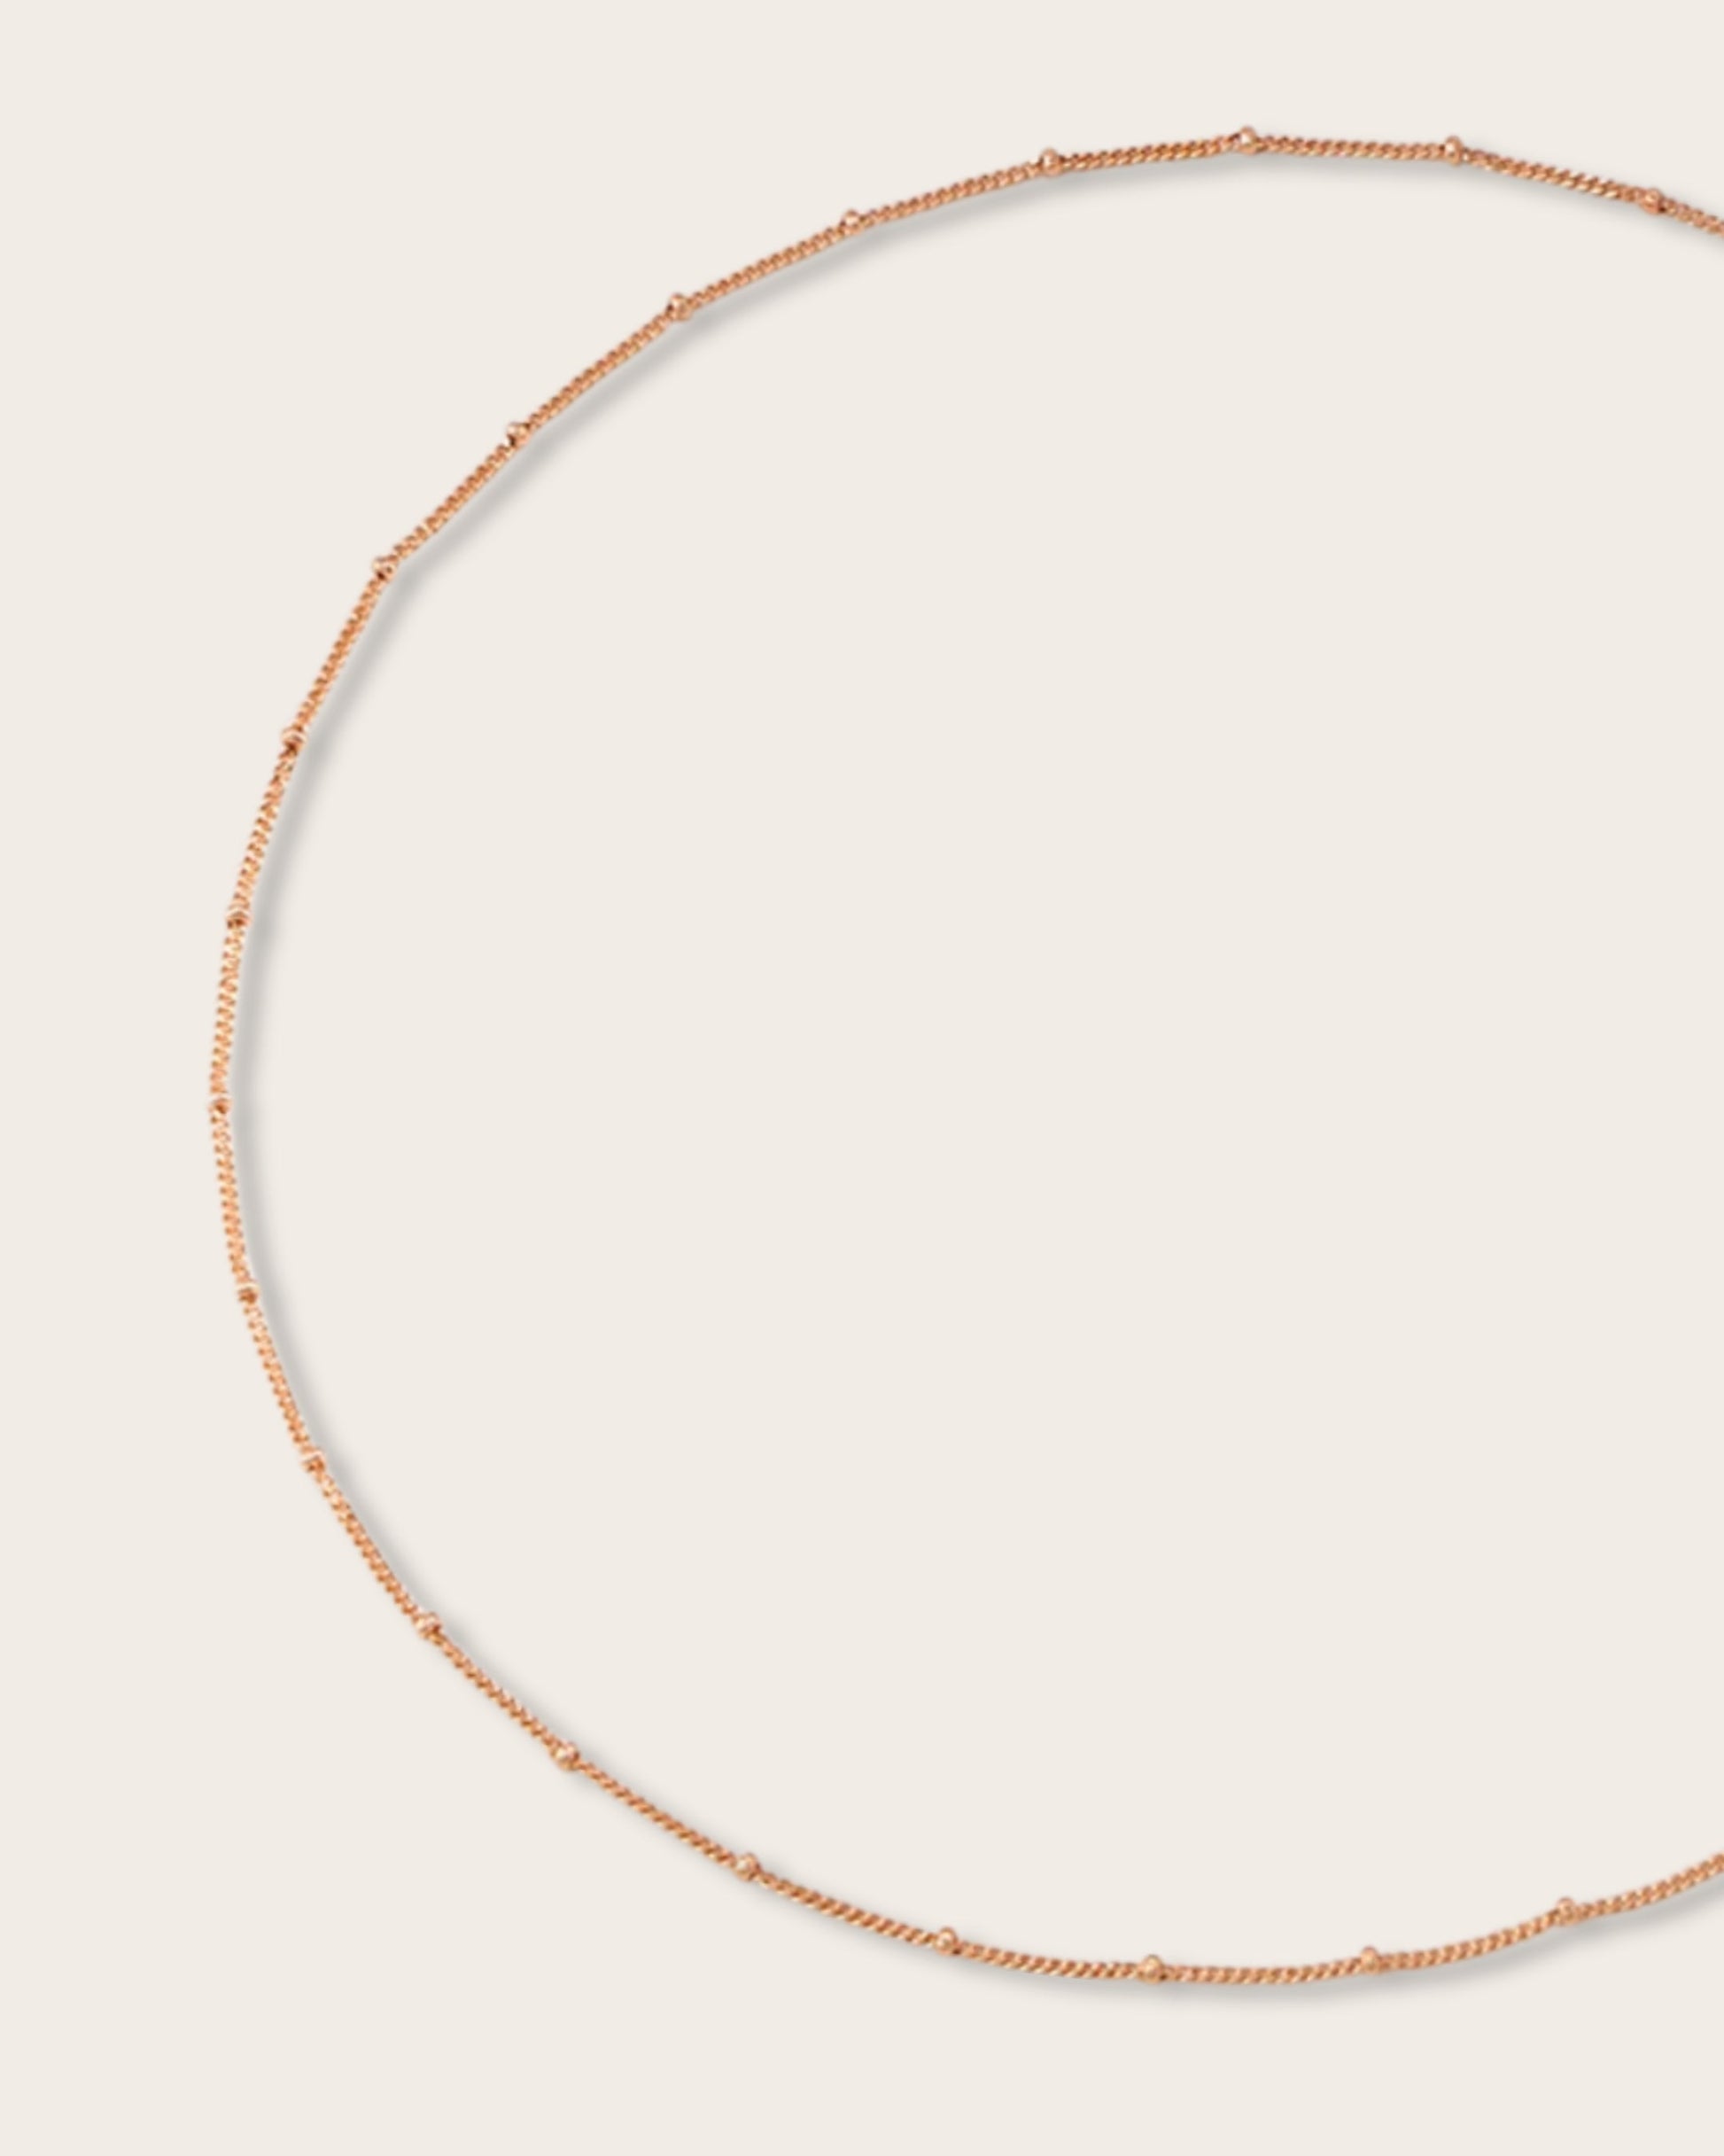 S925 Sterling Silver with 18K Gold Vermeil chain necklace - Adorn it in your own way-  simple yet sophisticated design effortlessly complements any outfit, making it a go-to accessory for any occasion